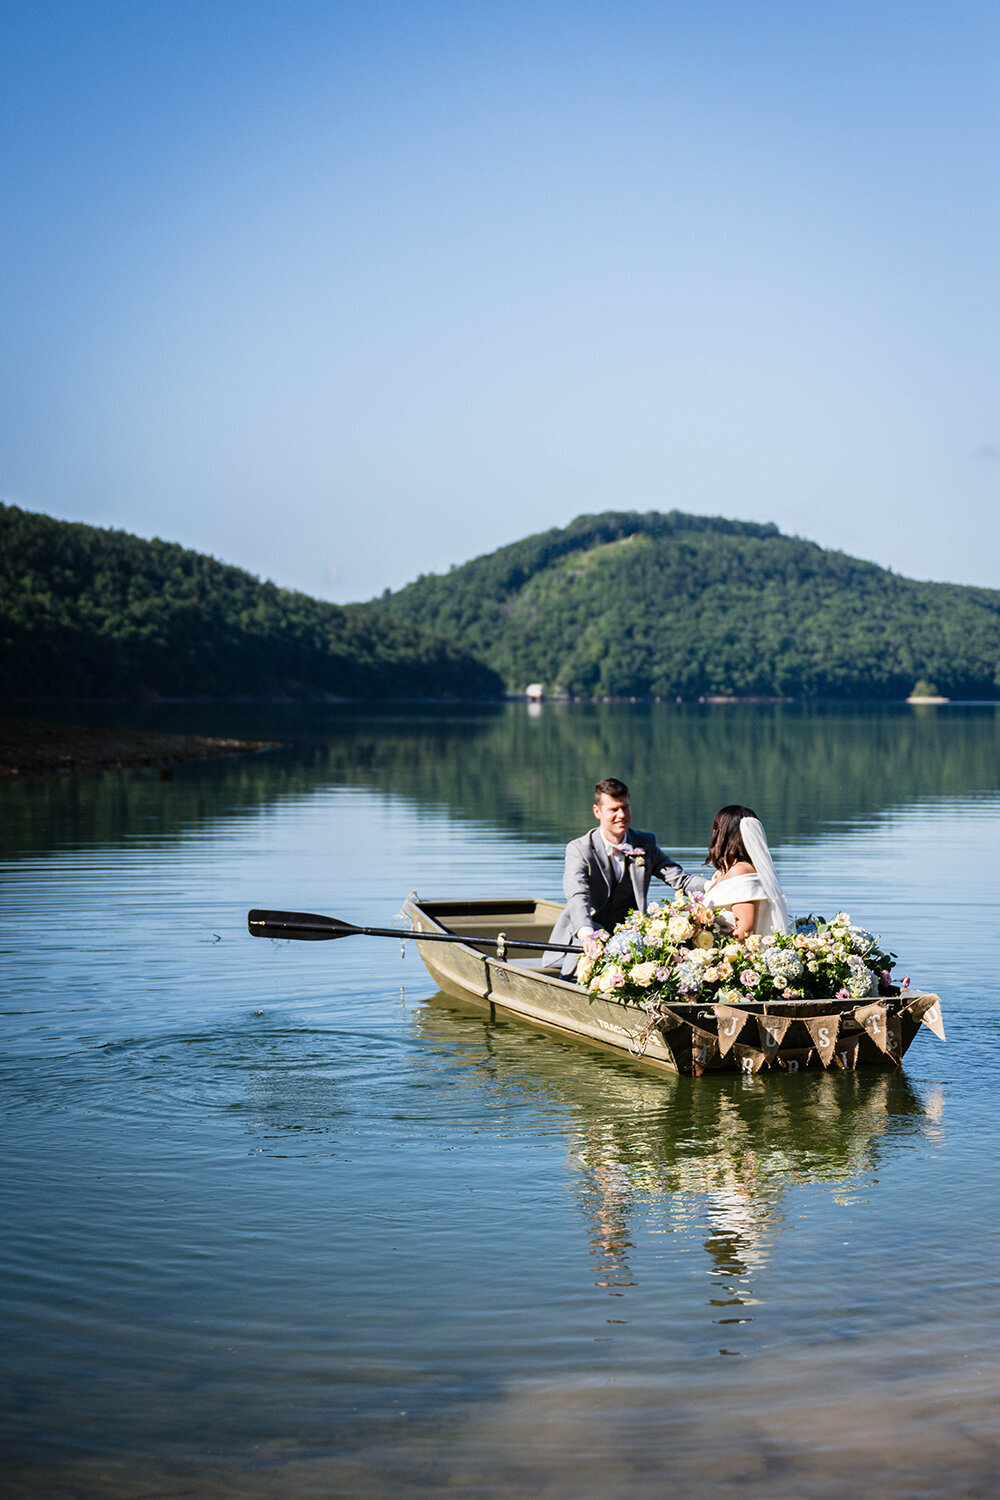 A wedding couple sit in a rowboat in the waters of Carvin’s Cove with the rolling hills of Southwest Virginia in the background. The boat is adorned with pastel flowers and a sign that reads “just married” on the back of the boat. One marrier is rowing the oars while the other sits and looks at him.